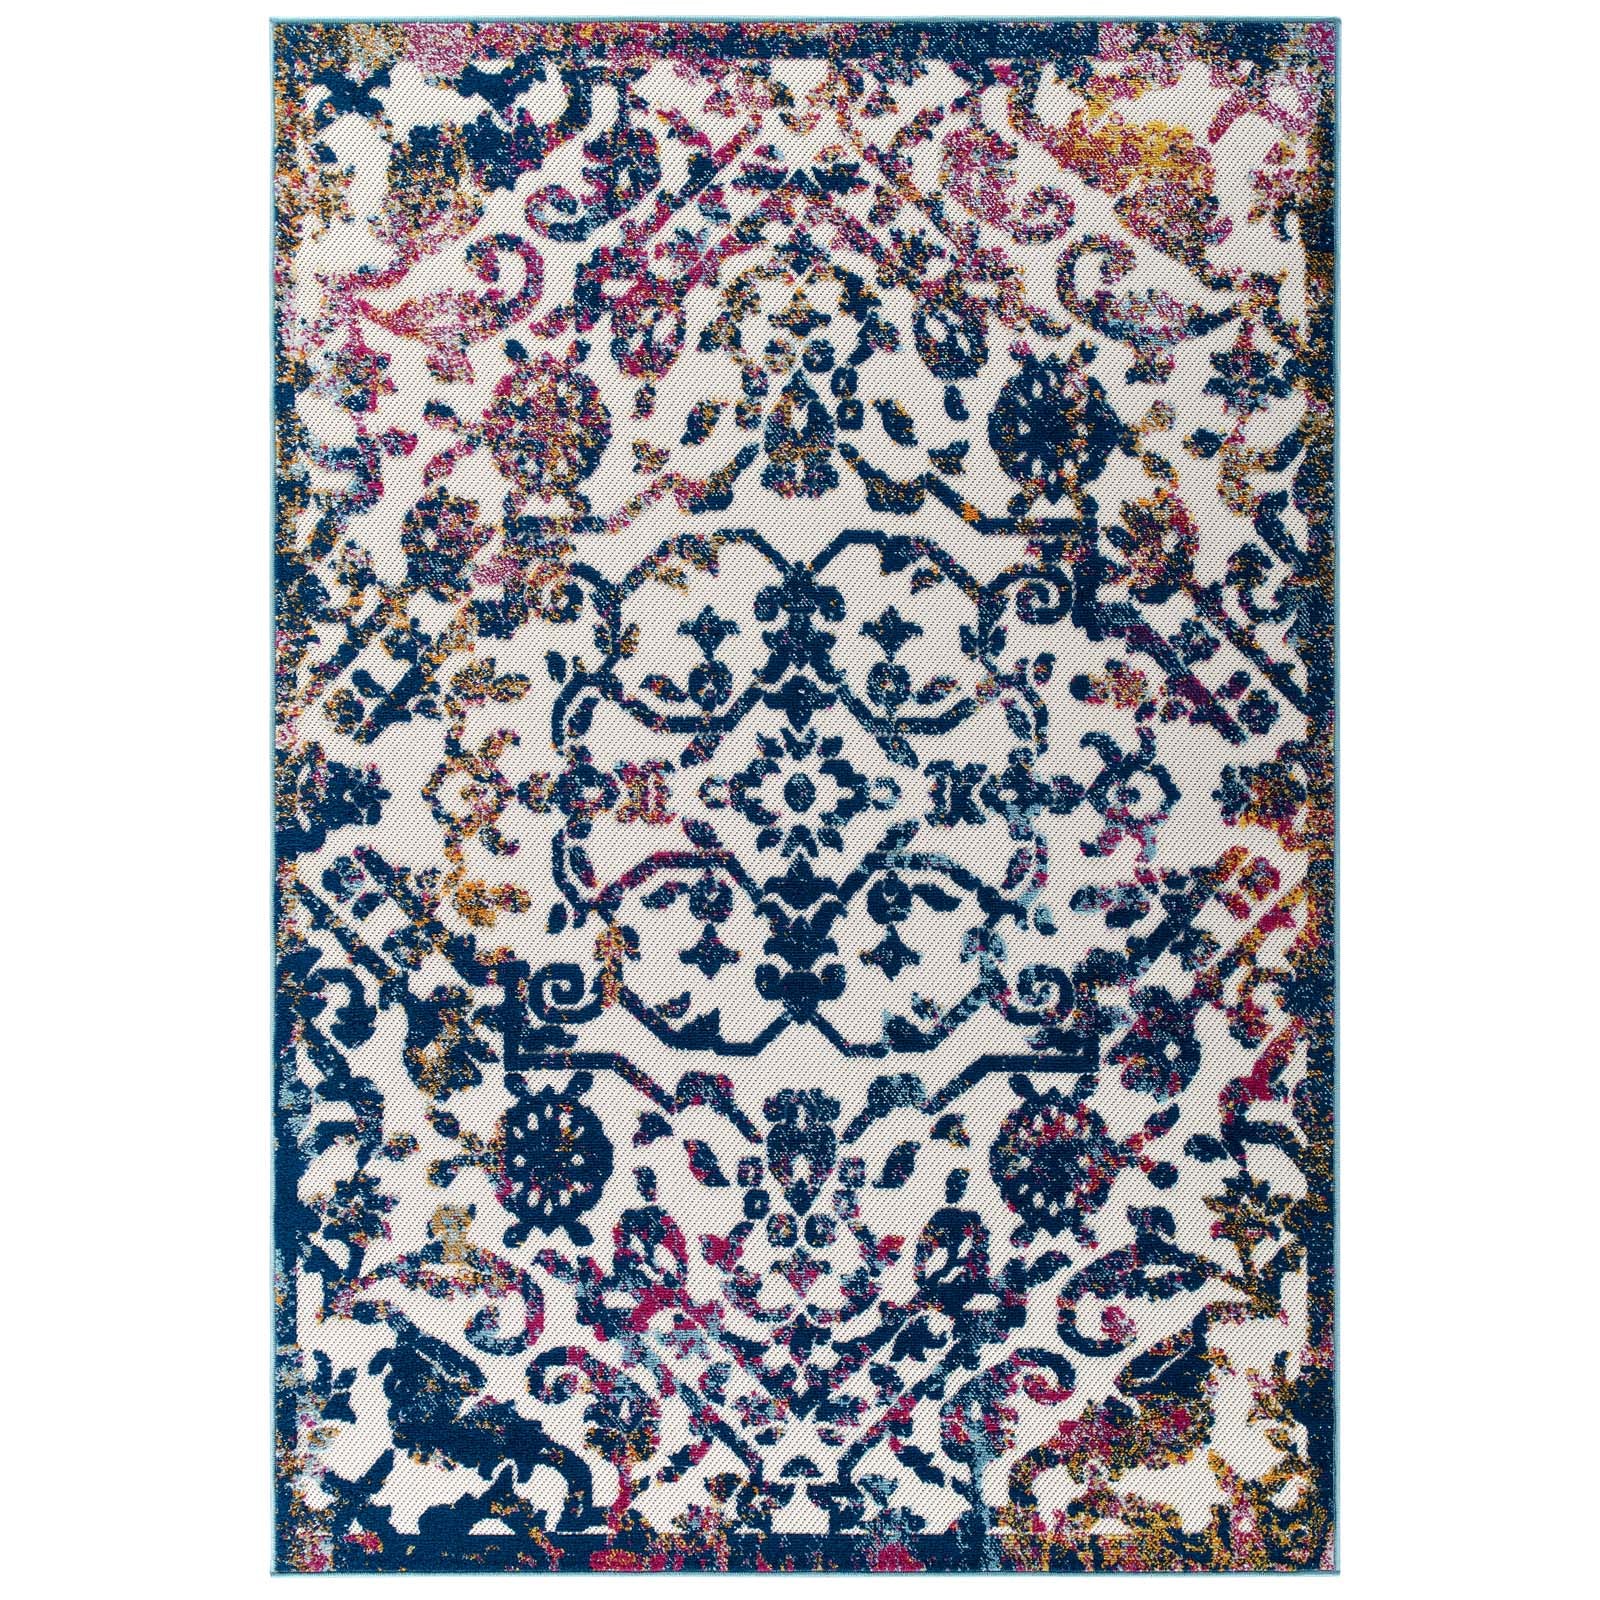 Modway Outdoor Rugs - Reflect Primrose 5x8 Outdoor Rug Multicolored